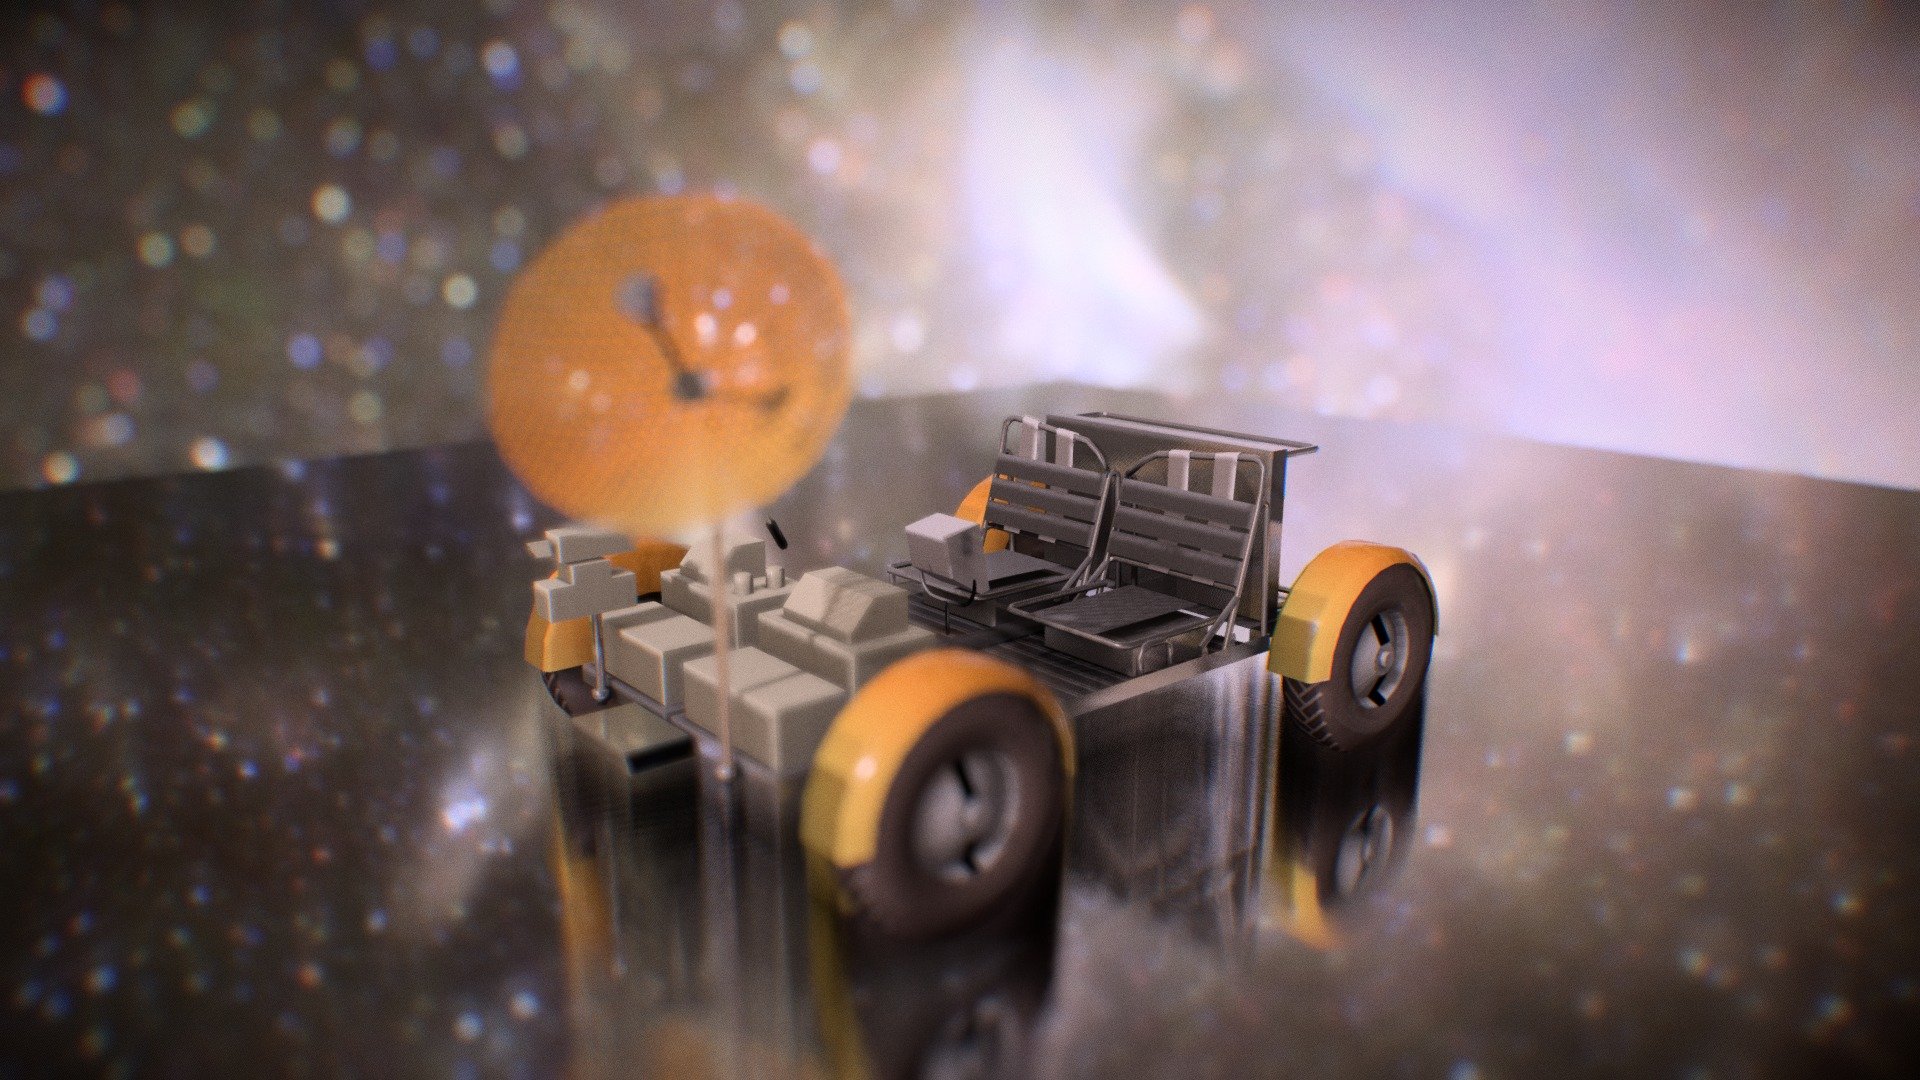 A moon rover made for a mobile app project back in 2013 - Moon Rover - 3D model by reaperrr1 3d model